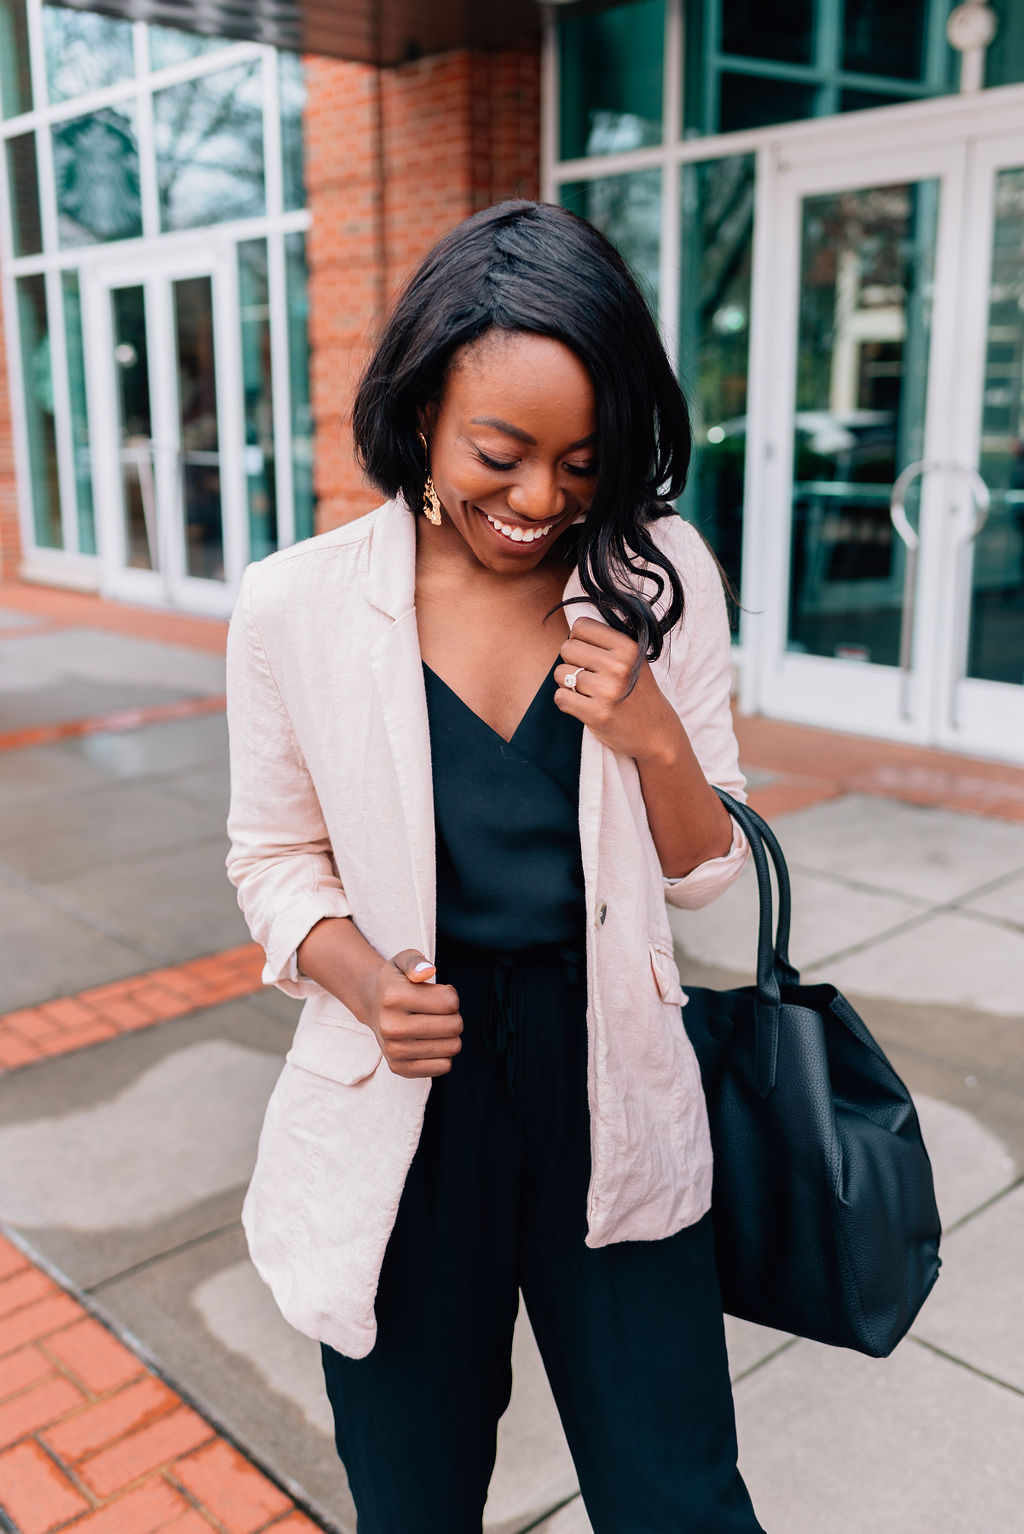 Greenville fashion blogger, Tomi Obebe from GoodTomiCha, shares her day to night style must-haves